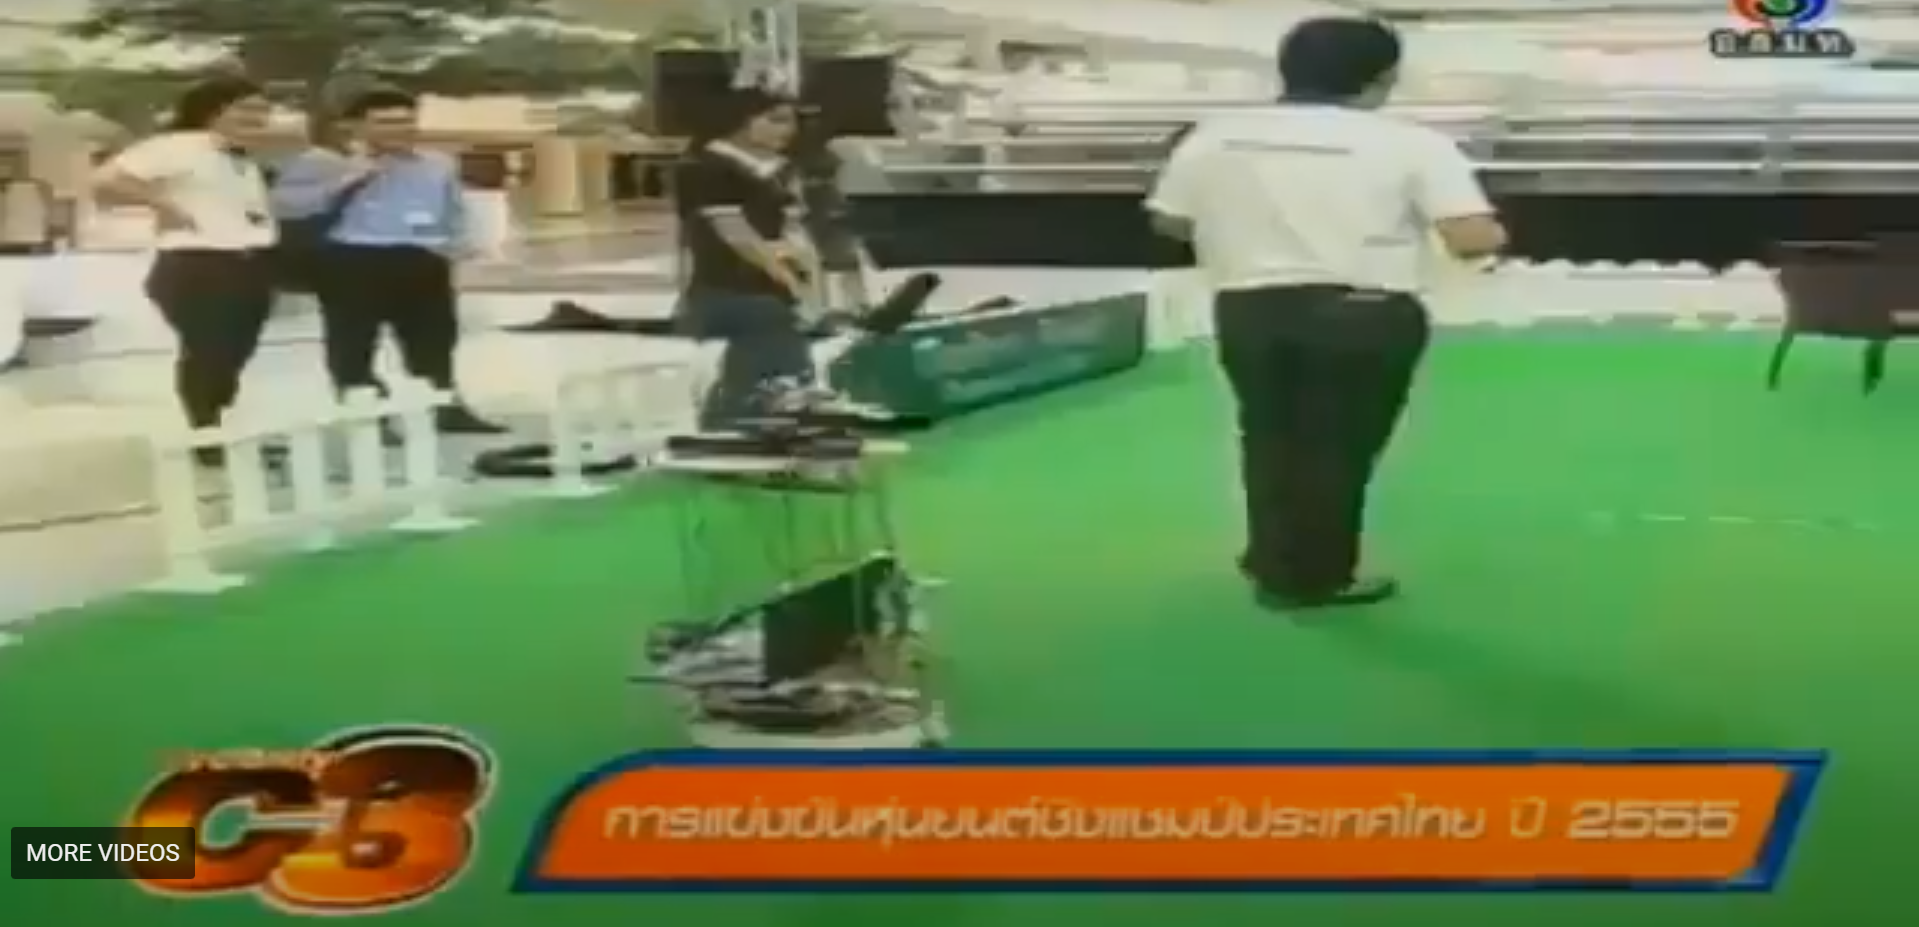 On behalf of Mahidol University, BART LAB Organizes the Thailand Robot Championship 2012 (TRC 2012) and Media Coverage by Channel 3